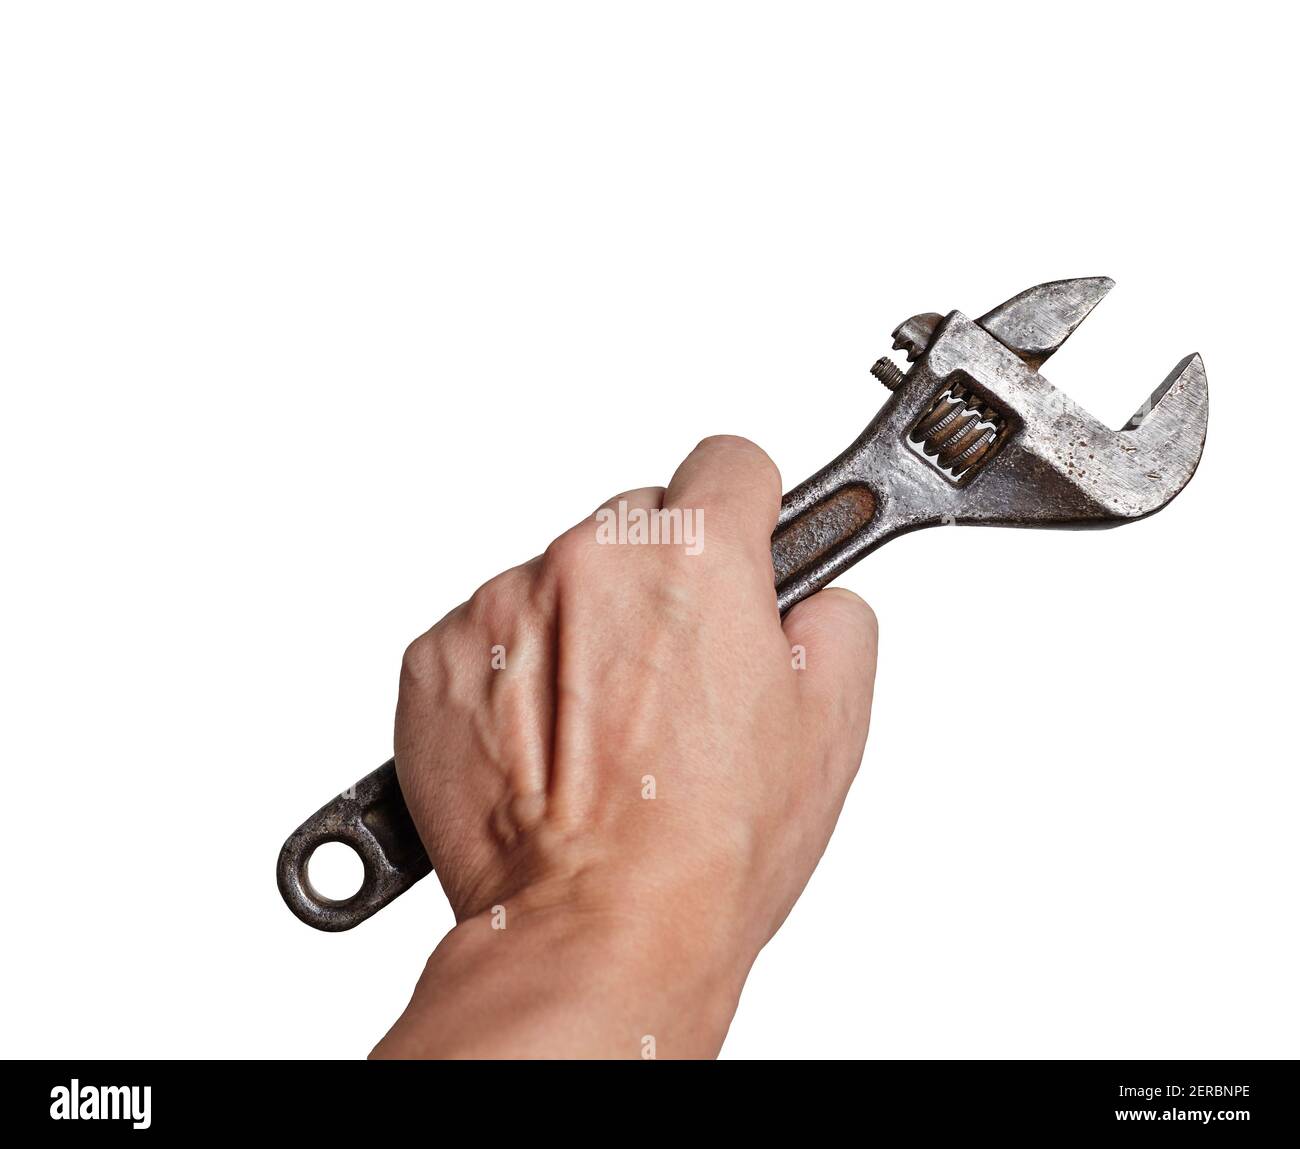 Human hand with adjustable wrench isolated on white background with clipping path. Copy space, no shadows Stock Photo